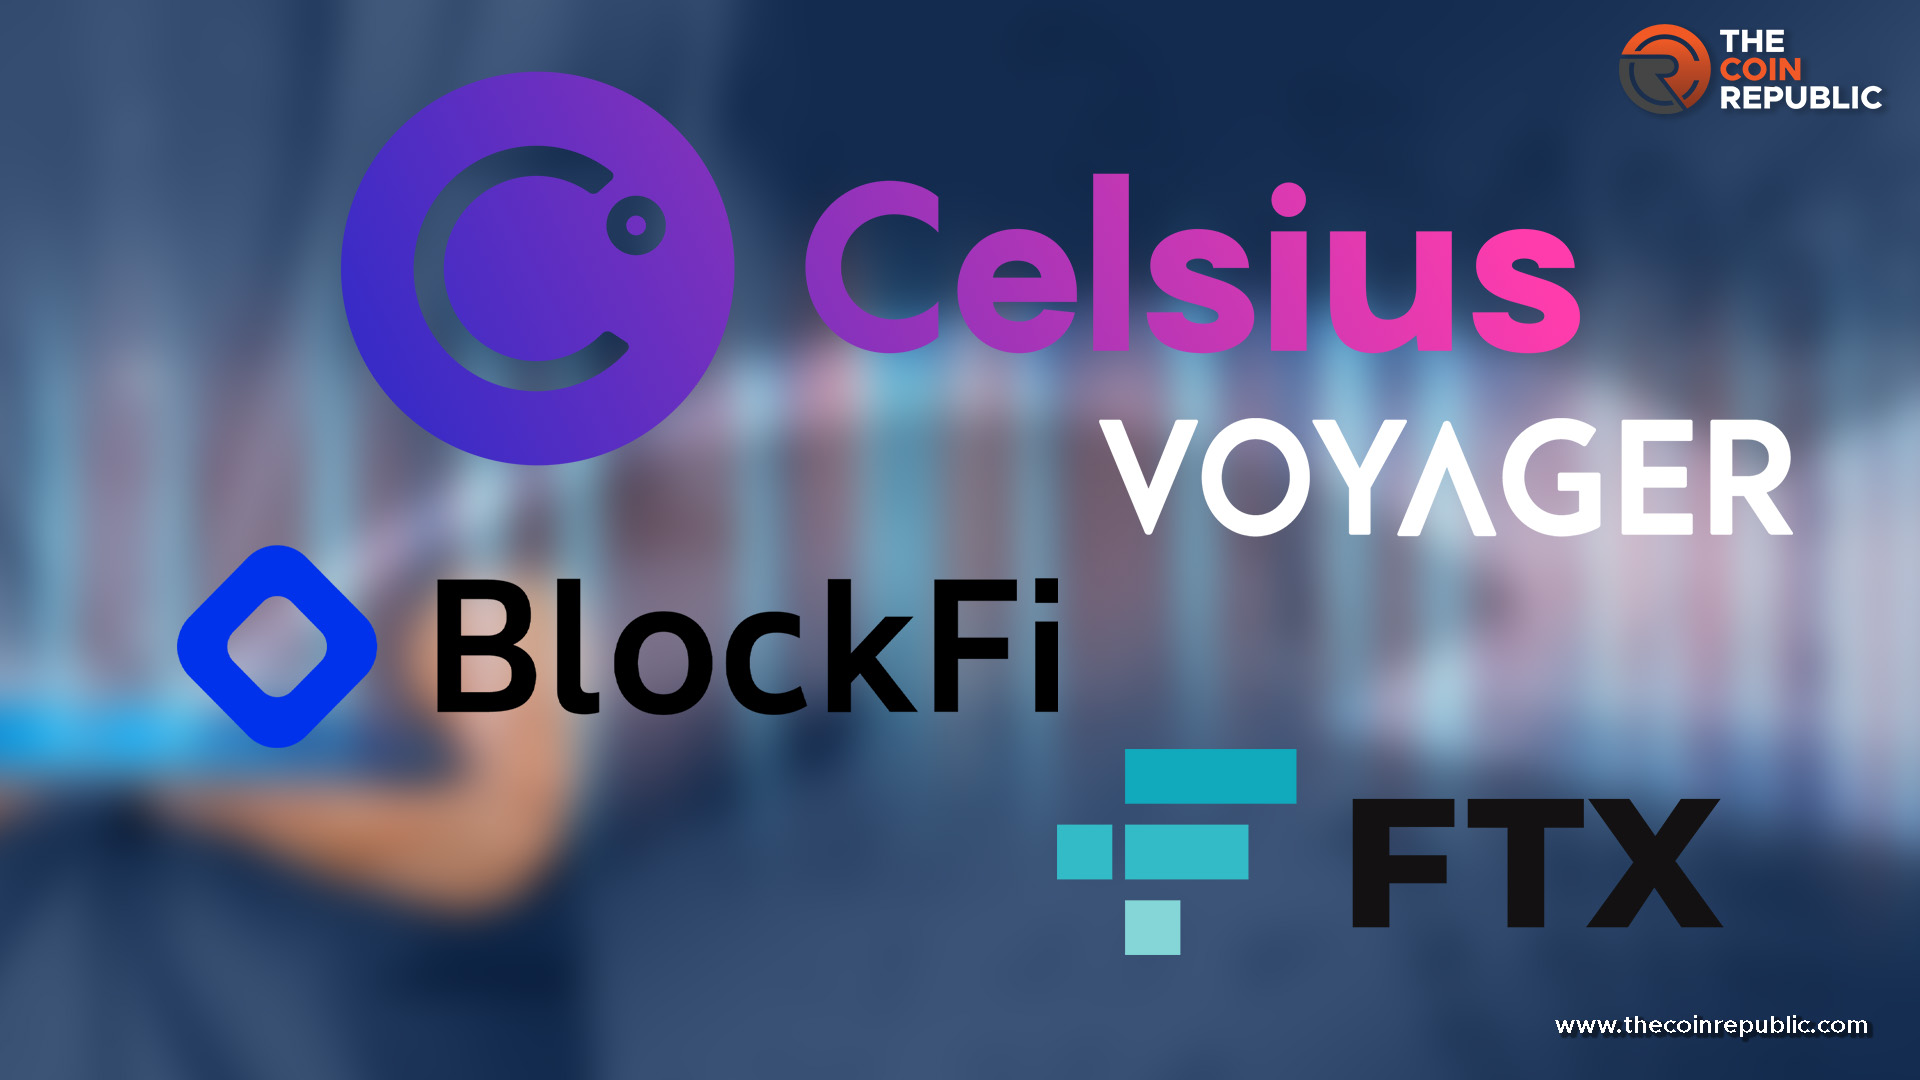 Investors Are Selling Their FTX, Celsius Network and Voyager Digital Claims At Steep Discounts